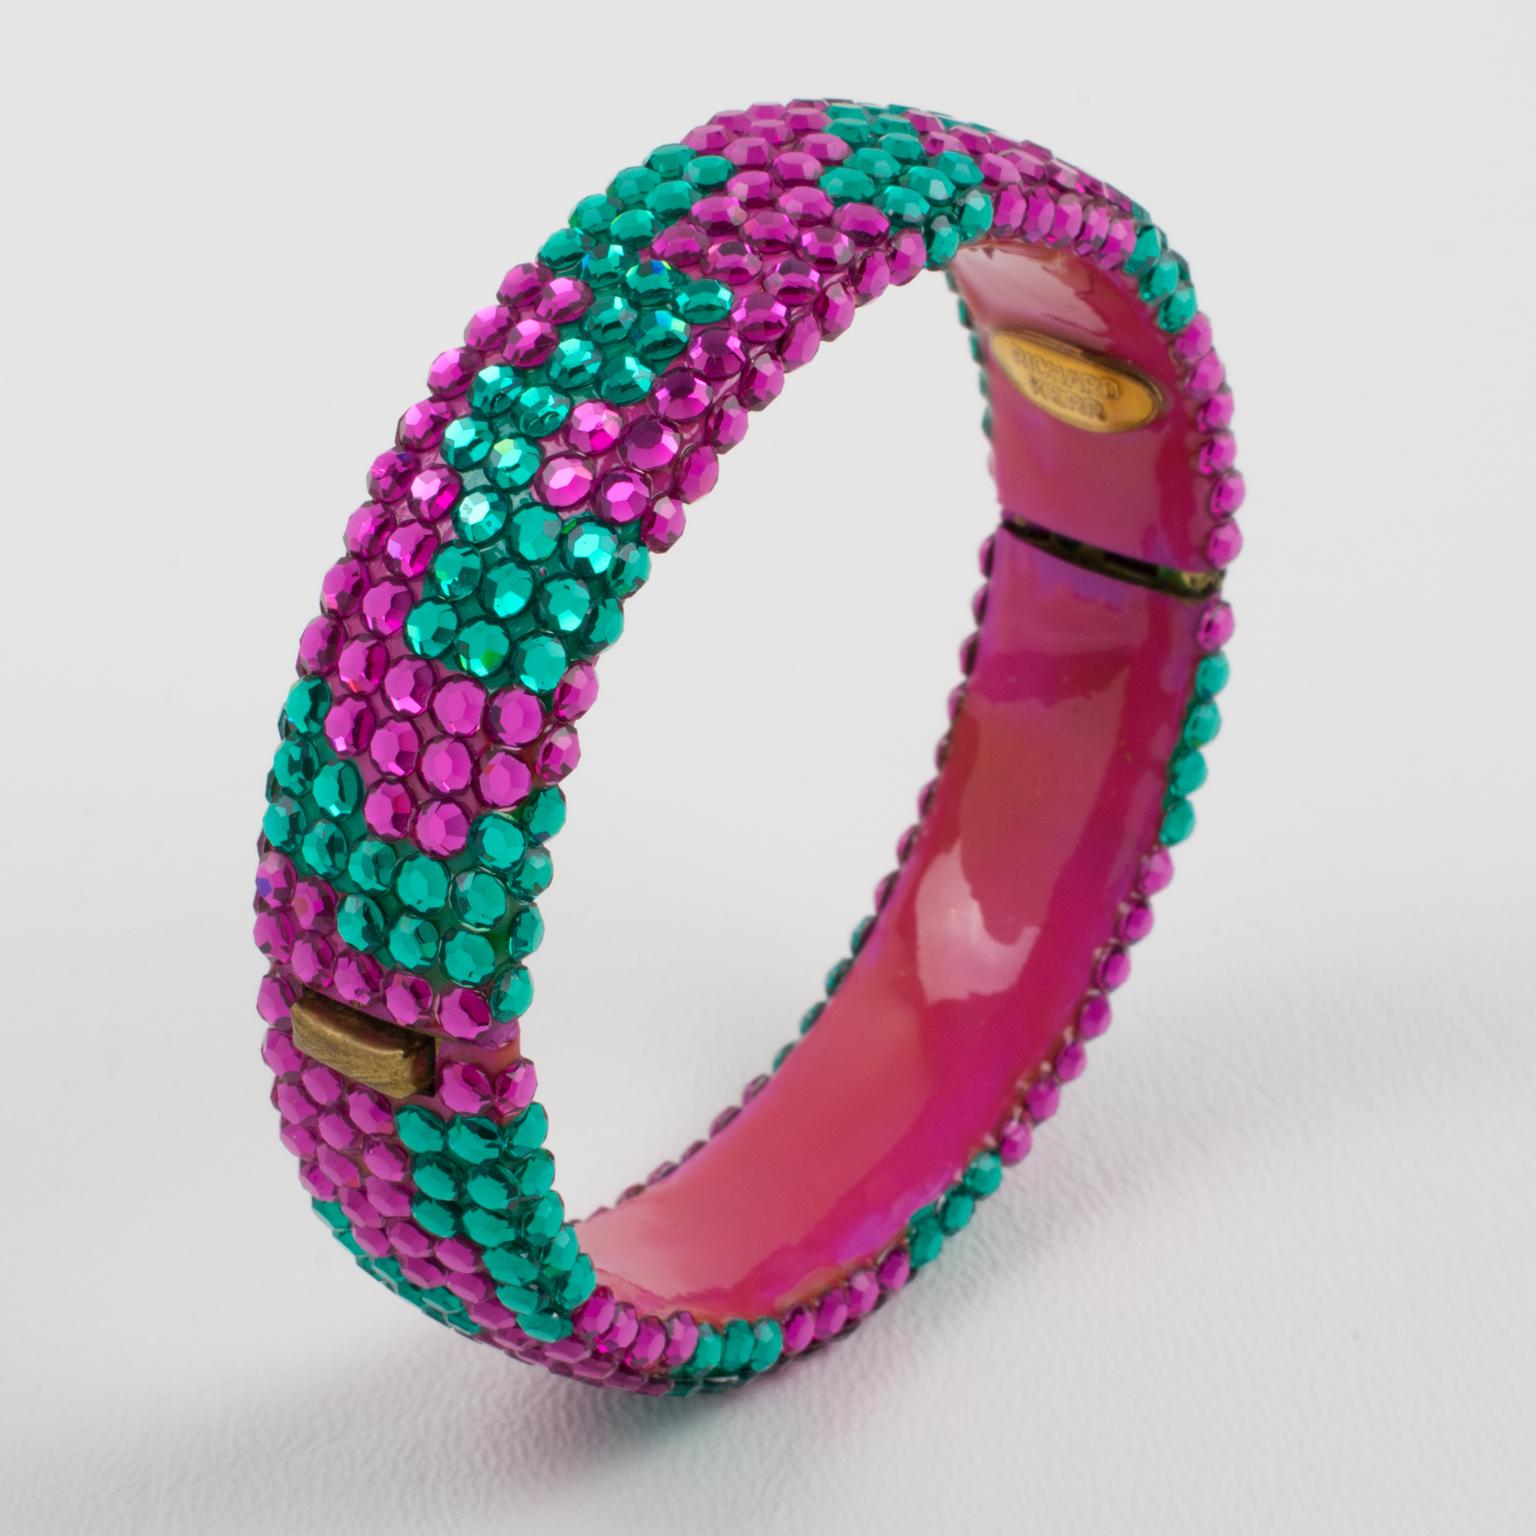 Modern Richard Kerr Pink and Turquoise Crystal Jeweled Clamper Bracelet For Sale